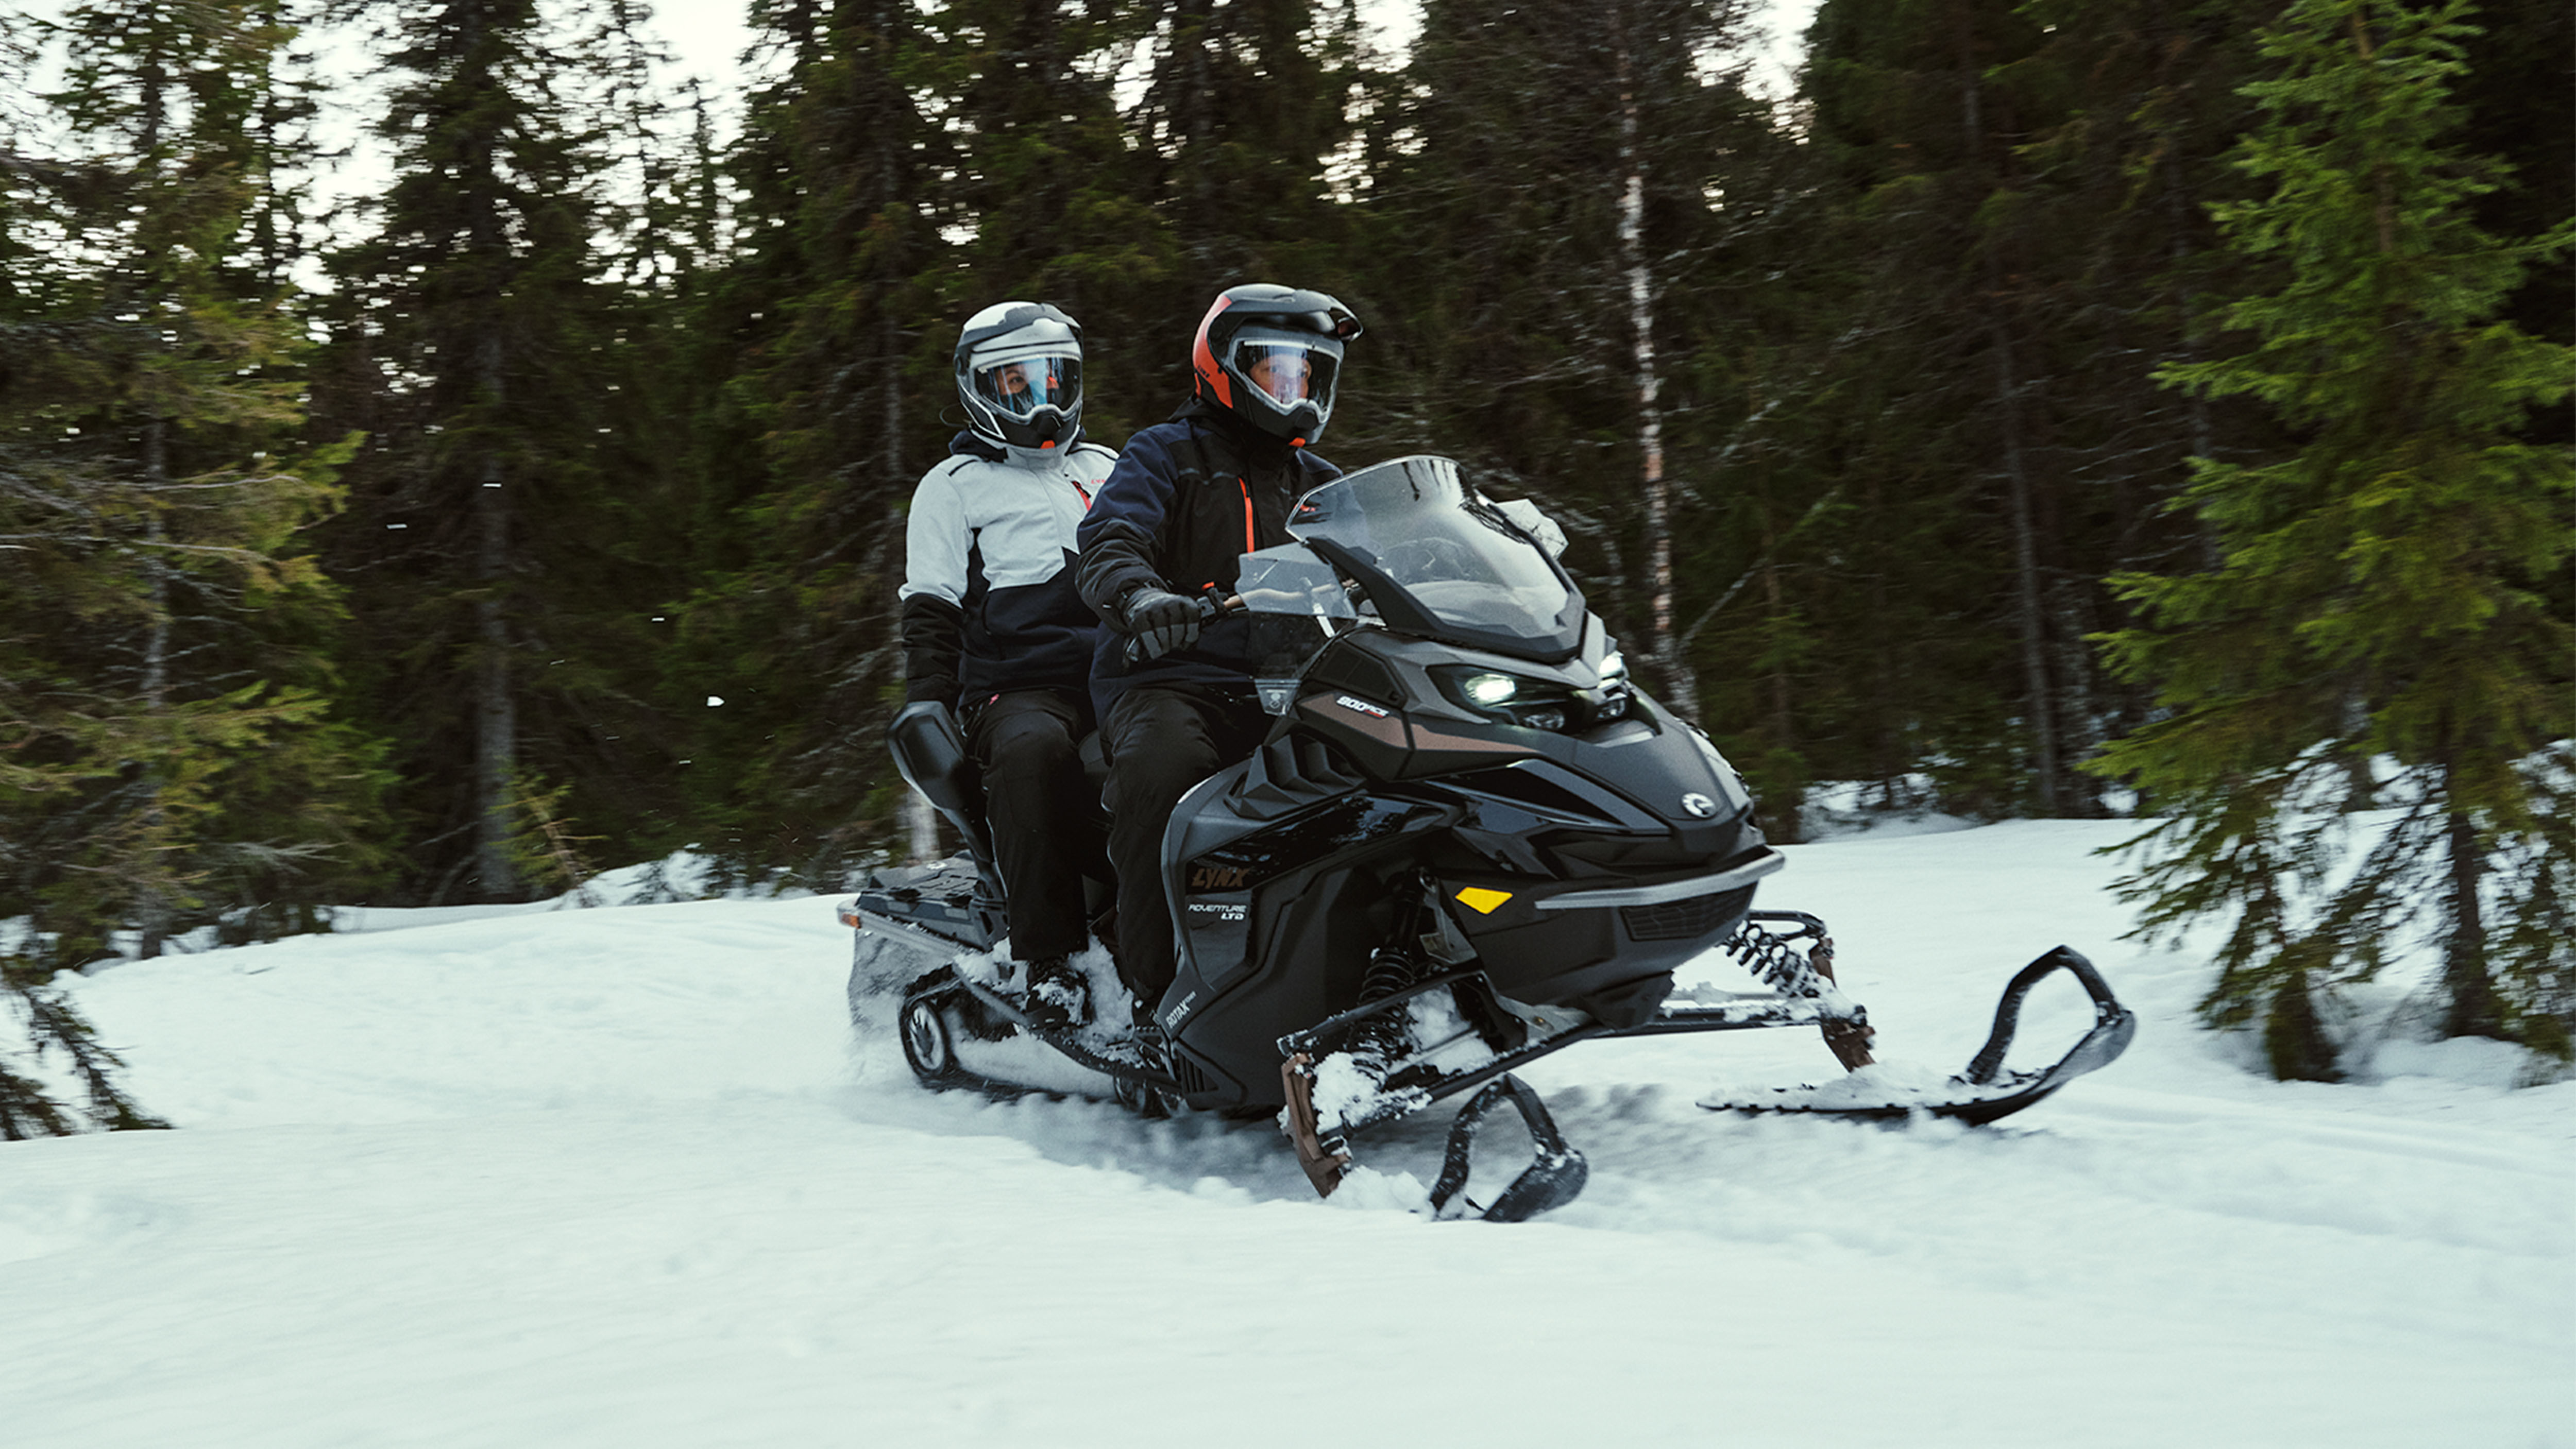 Man and woman riding together with Lynx Adventure Limited 2025 snowmobile with Passenger Kit